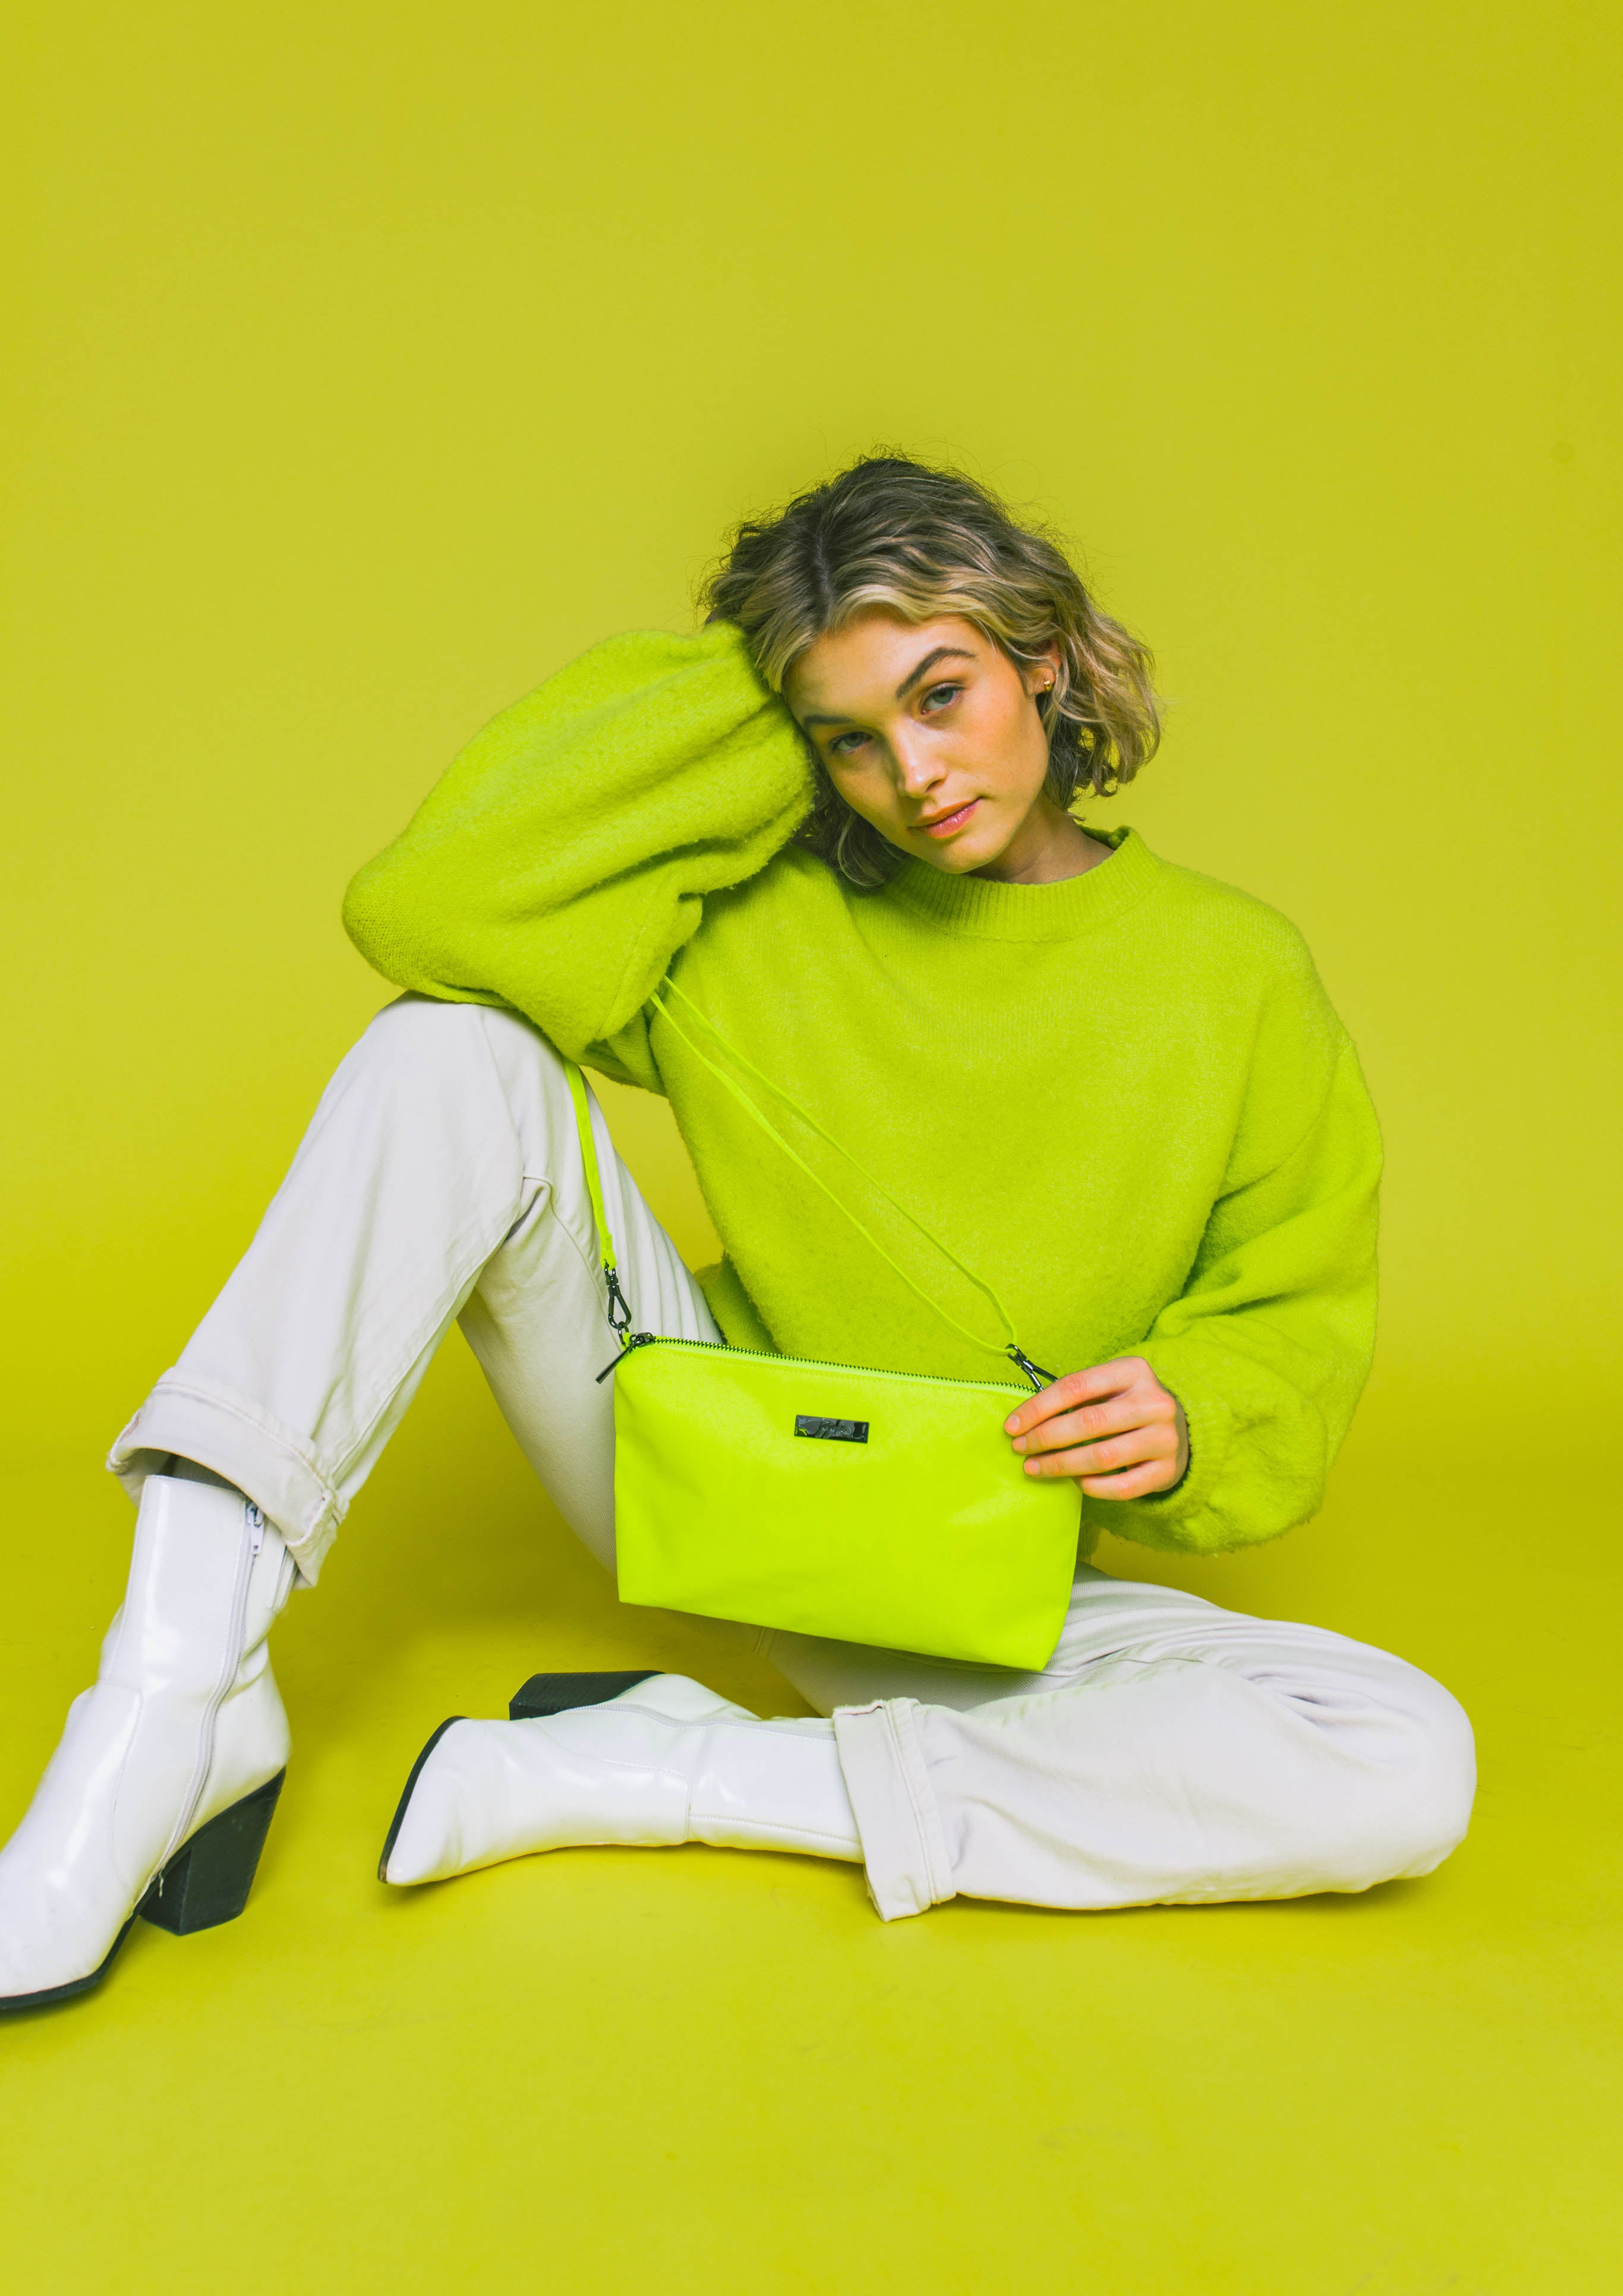 Neon Yellow Be Quick Crossbody Bag Worn by Woman wearing Matching Colored Sweater